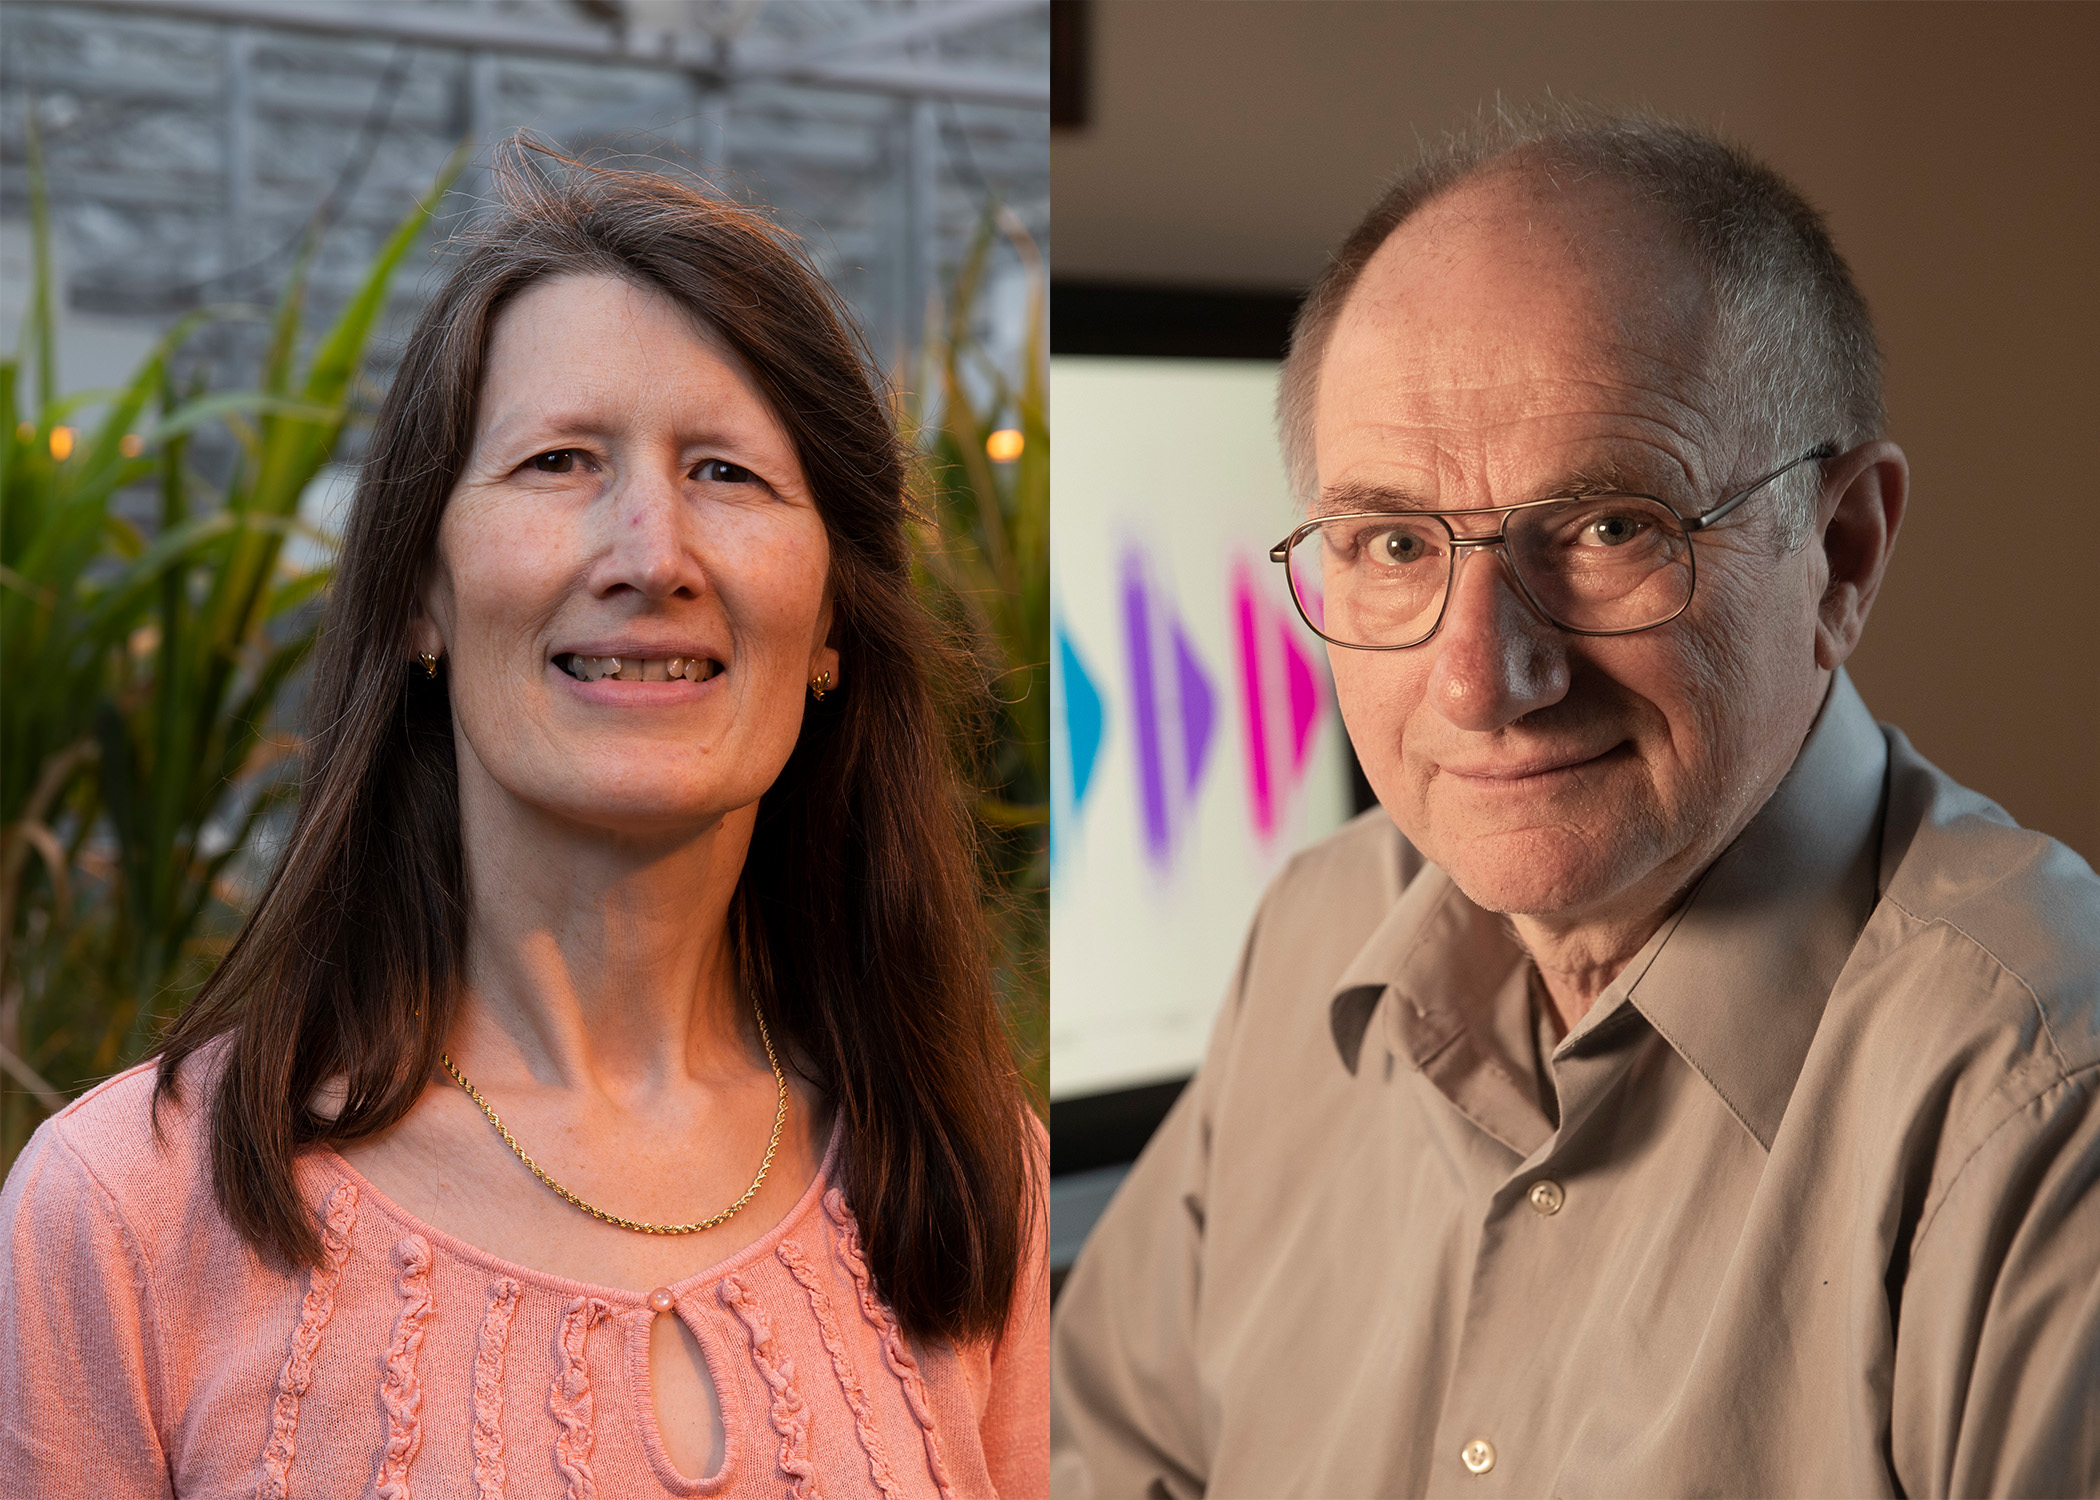 The title of Distinguished Research Professor is awarded to faculty who are internationally recognized for their original contributions to knowledge and whose work promises to foster continued creativity in their discipline. Katrien Devos and Ignacy Misztal are two of the 2020 recipients.